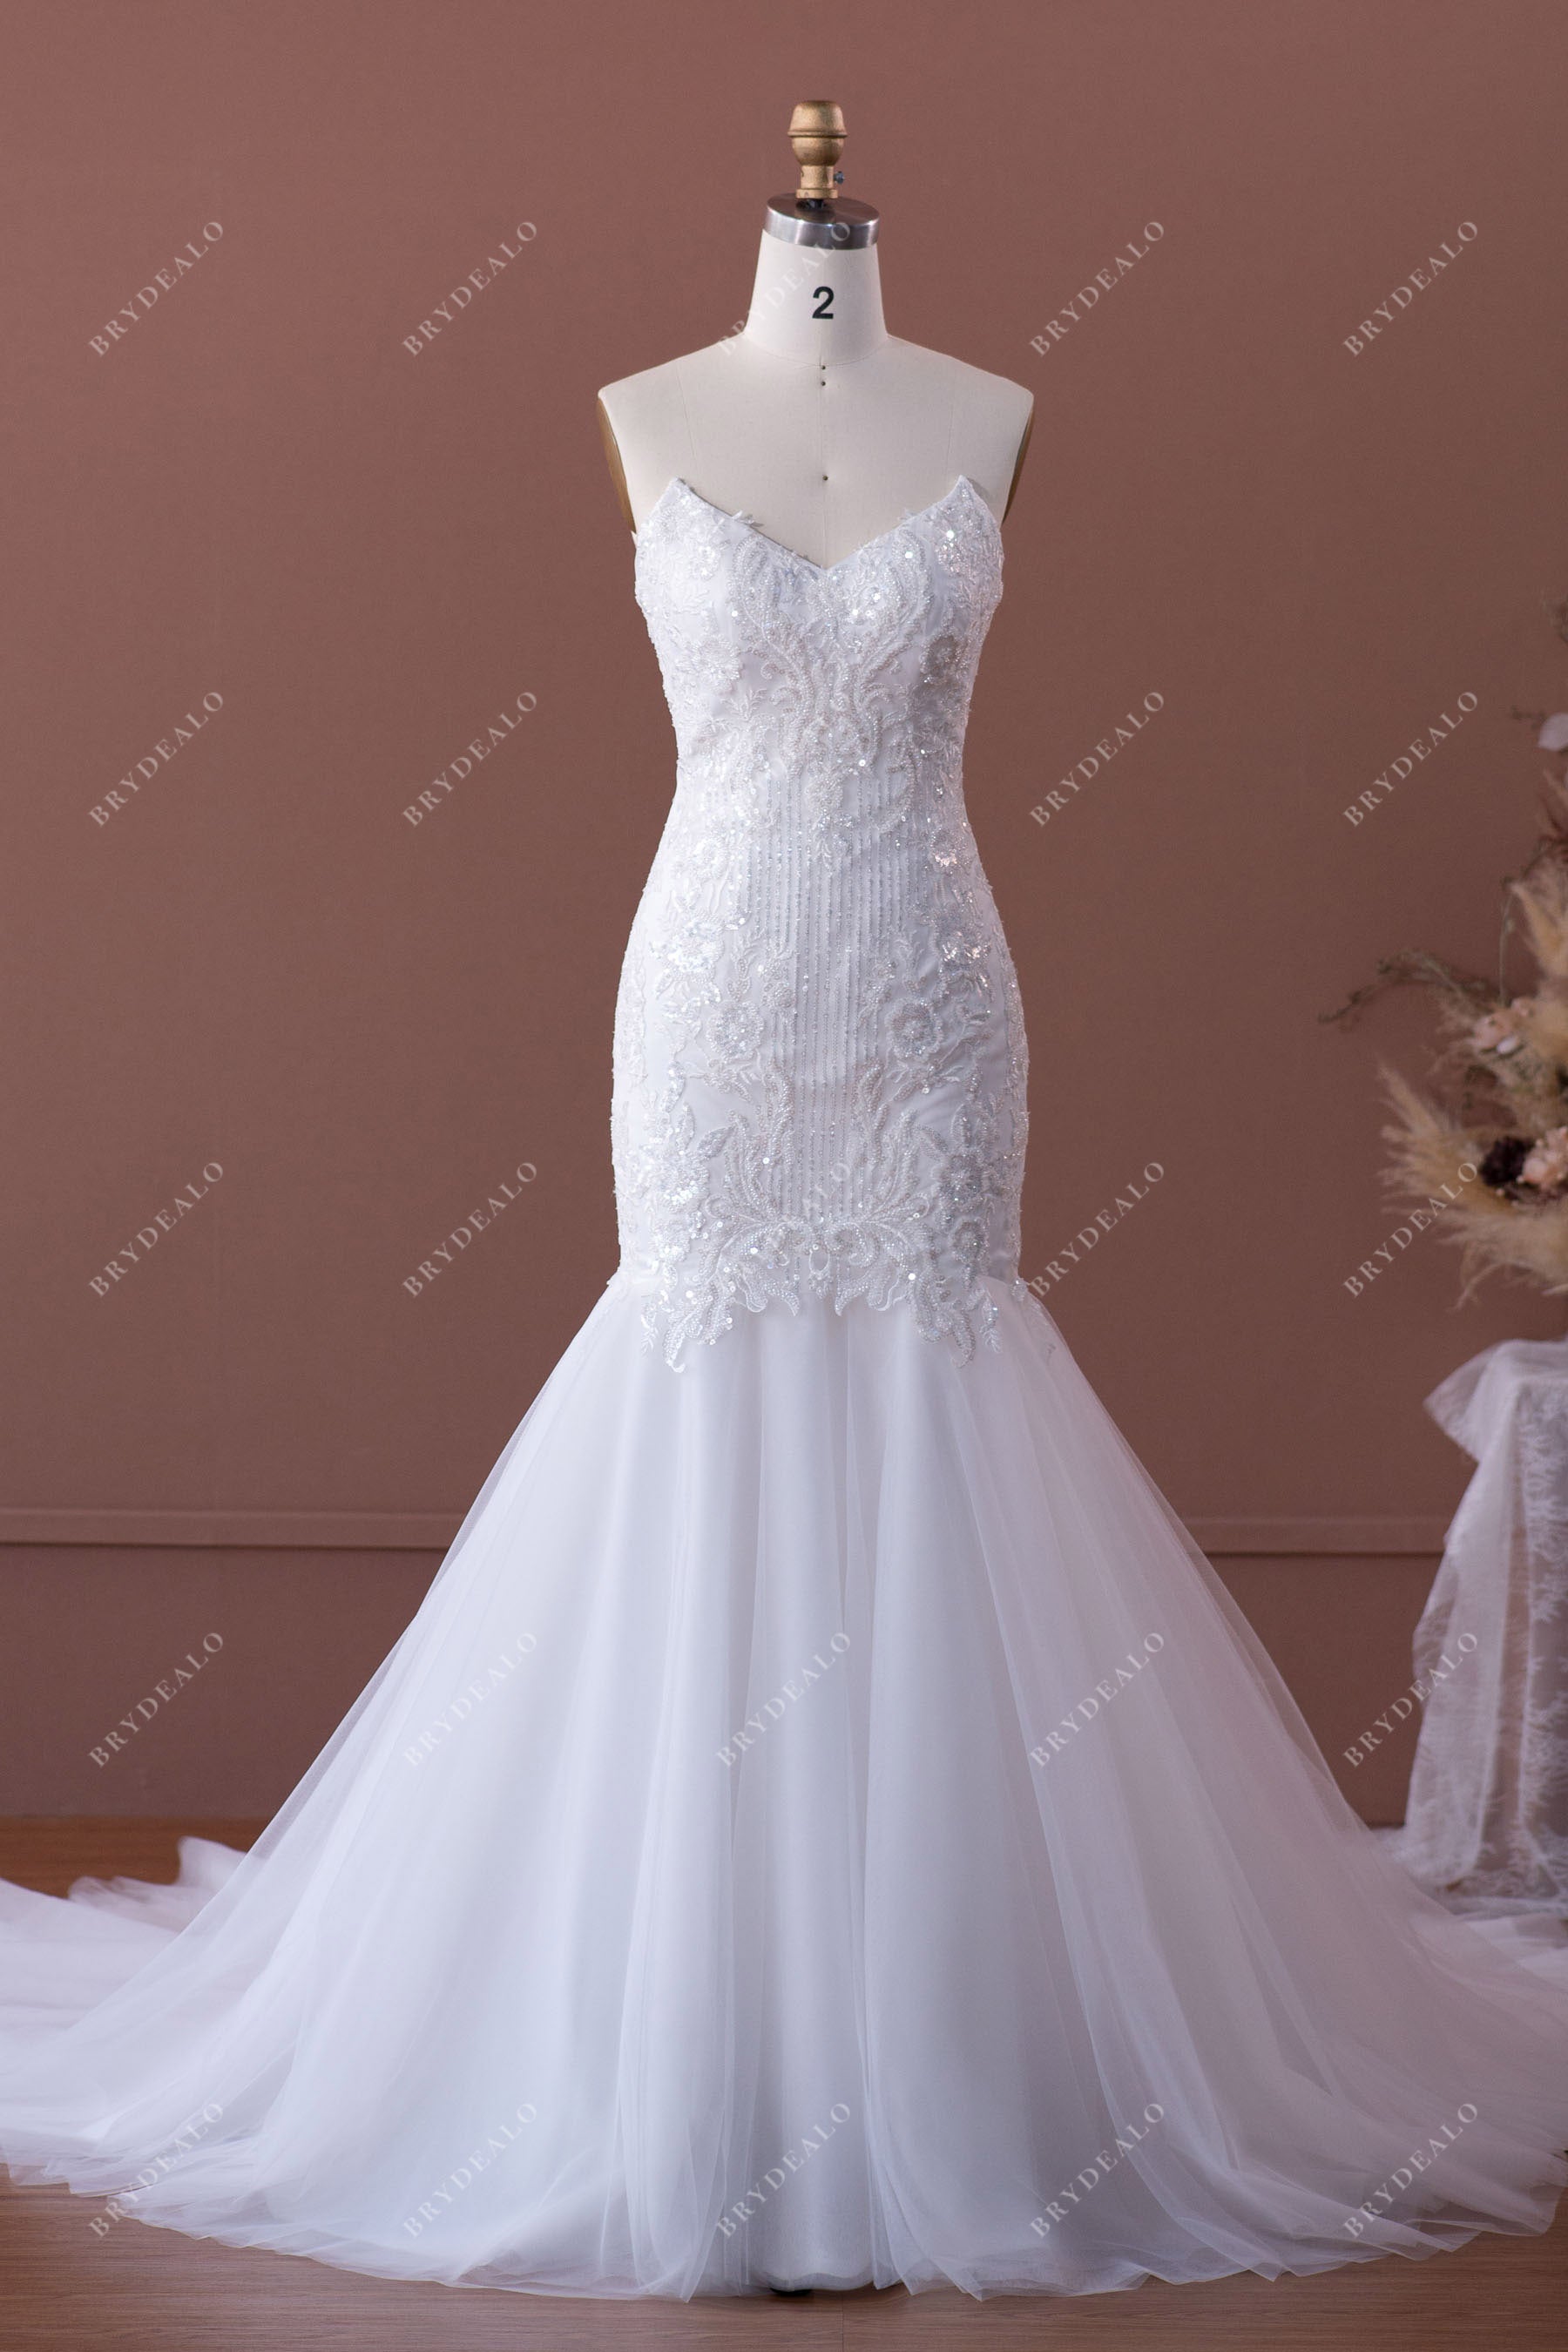 shimmery strapless lace mermaid wedding dress